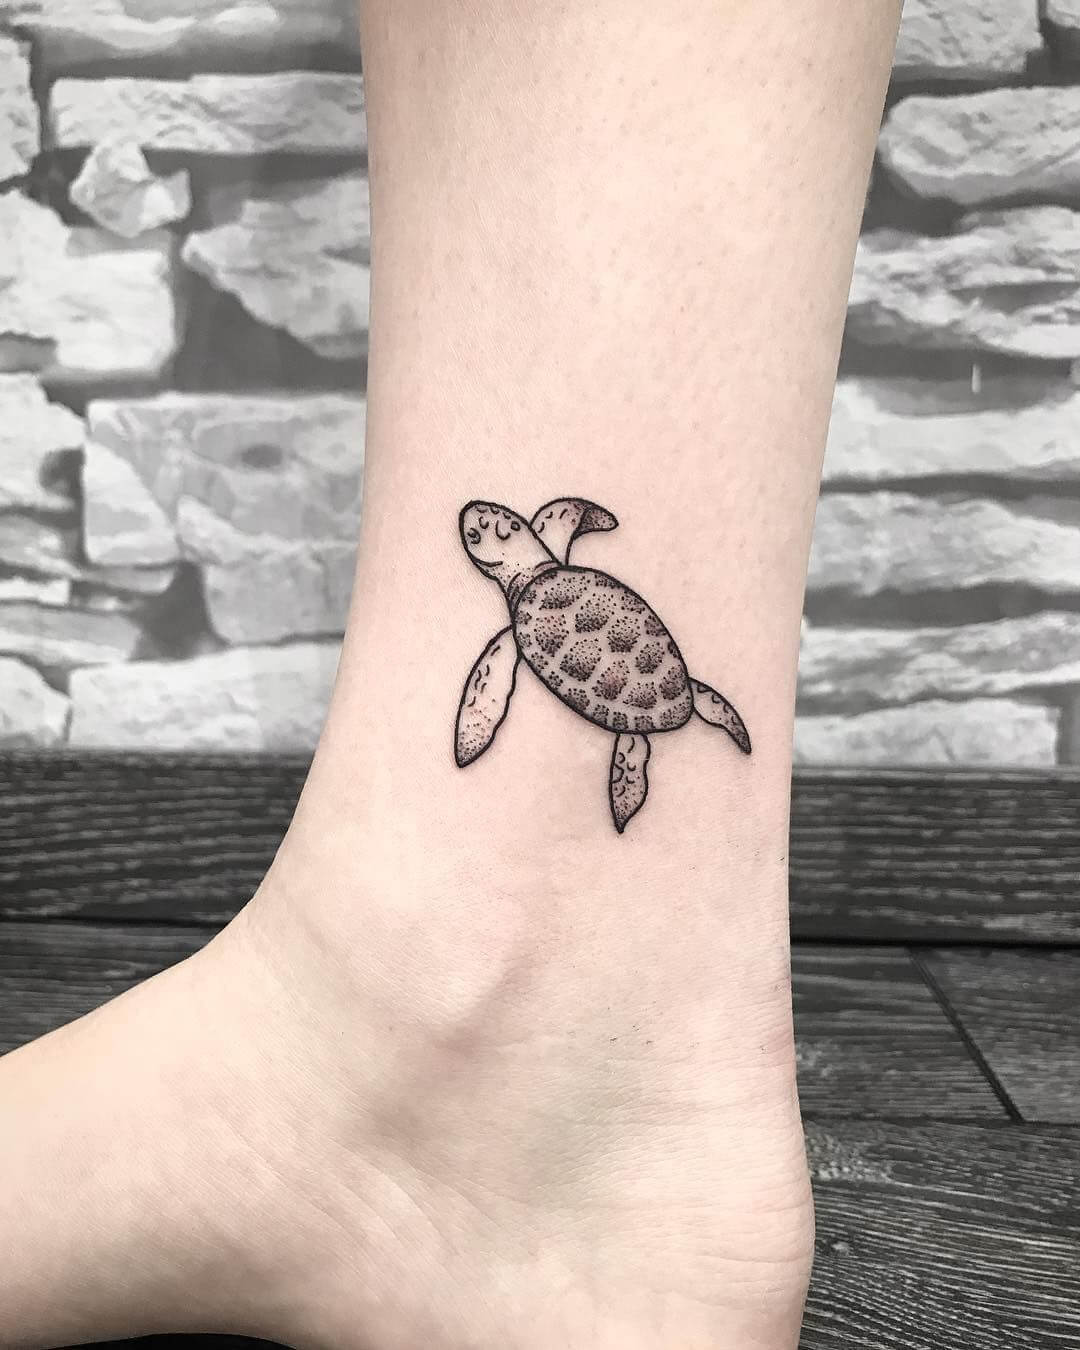 50 Top Turtle Tattoo Designs The Symbolism Behind Turtle Body Art   Saved Tattoo